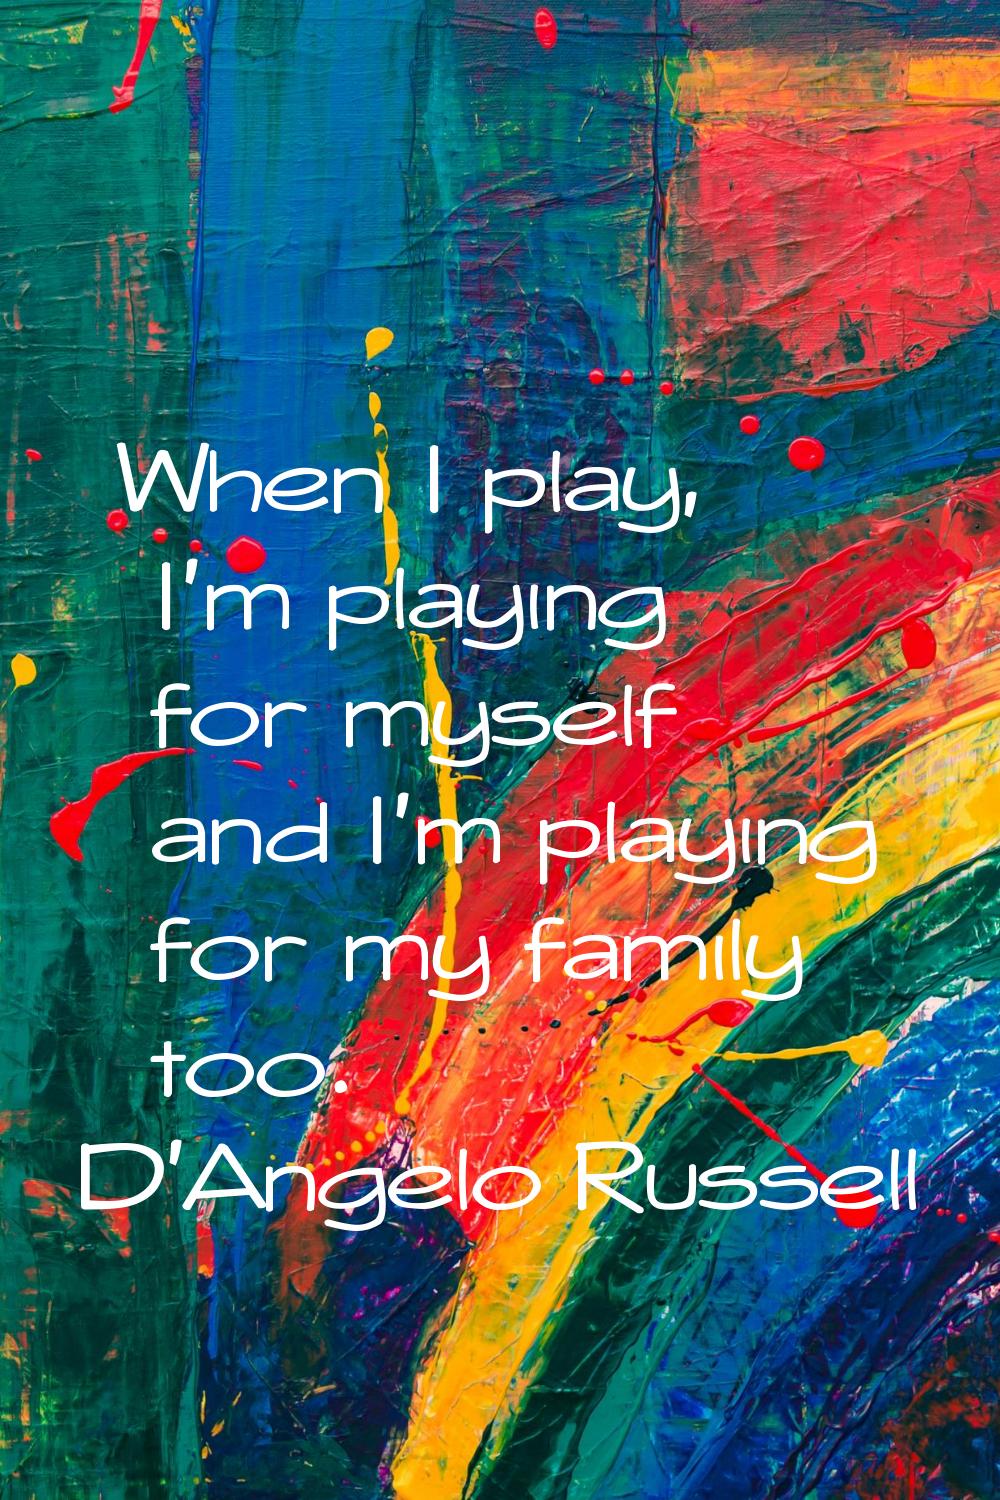 When I play, I'm playing for myself and I'm playing for my family too.